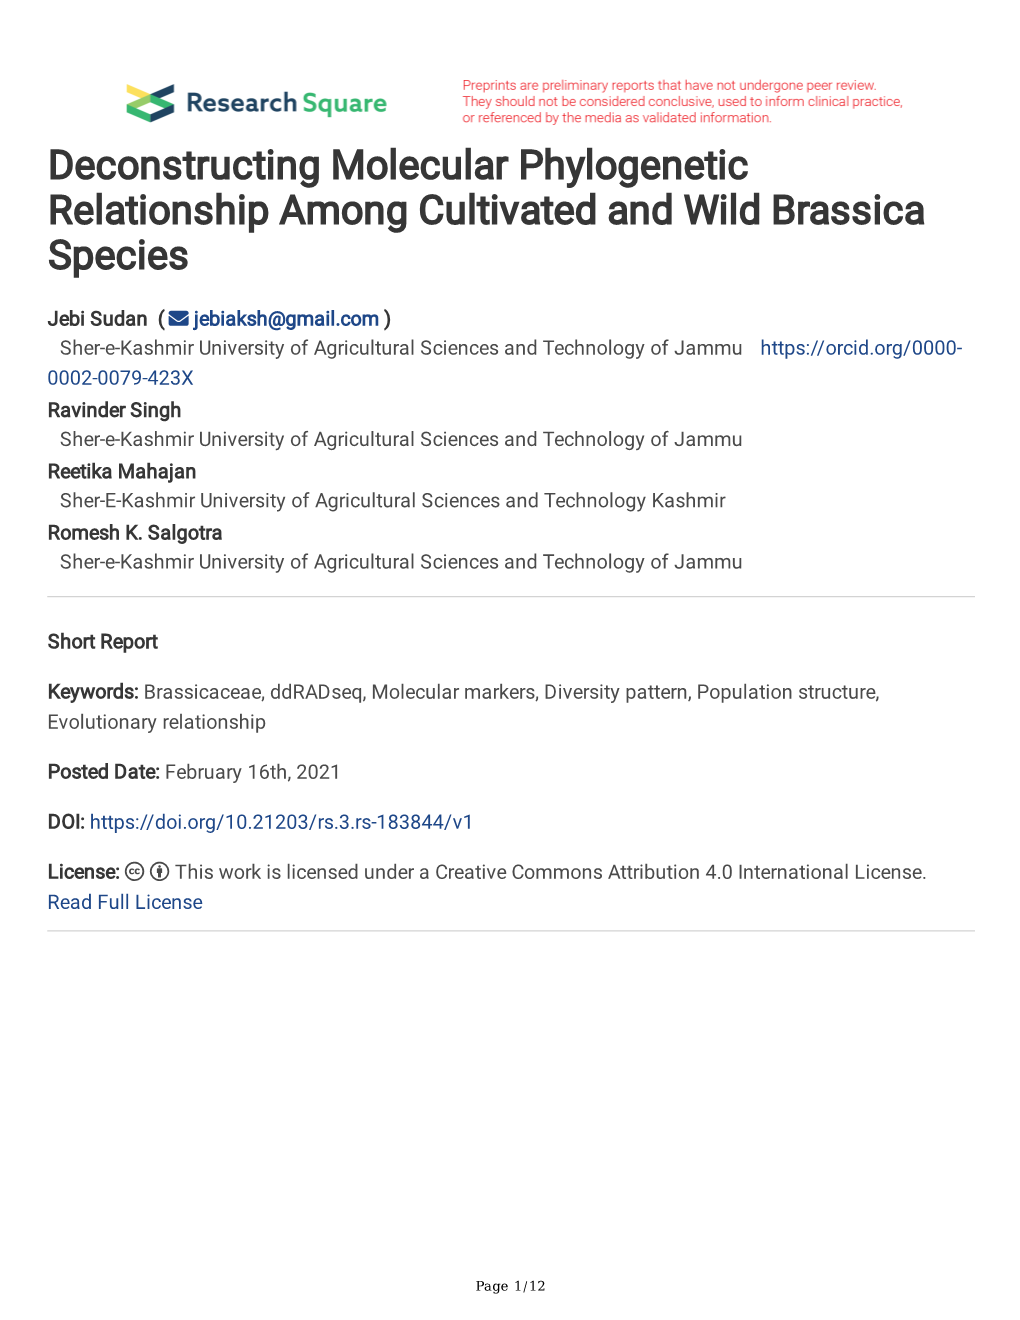 Deconstructing Molecular Phylogenetic Relationship Among Cultivated and Wild Brassica Species